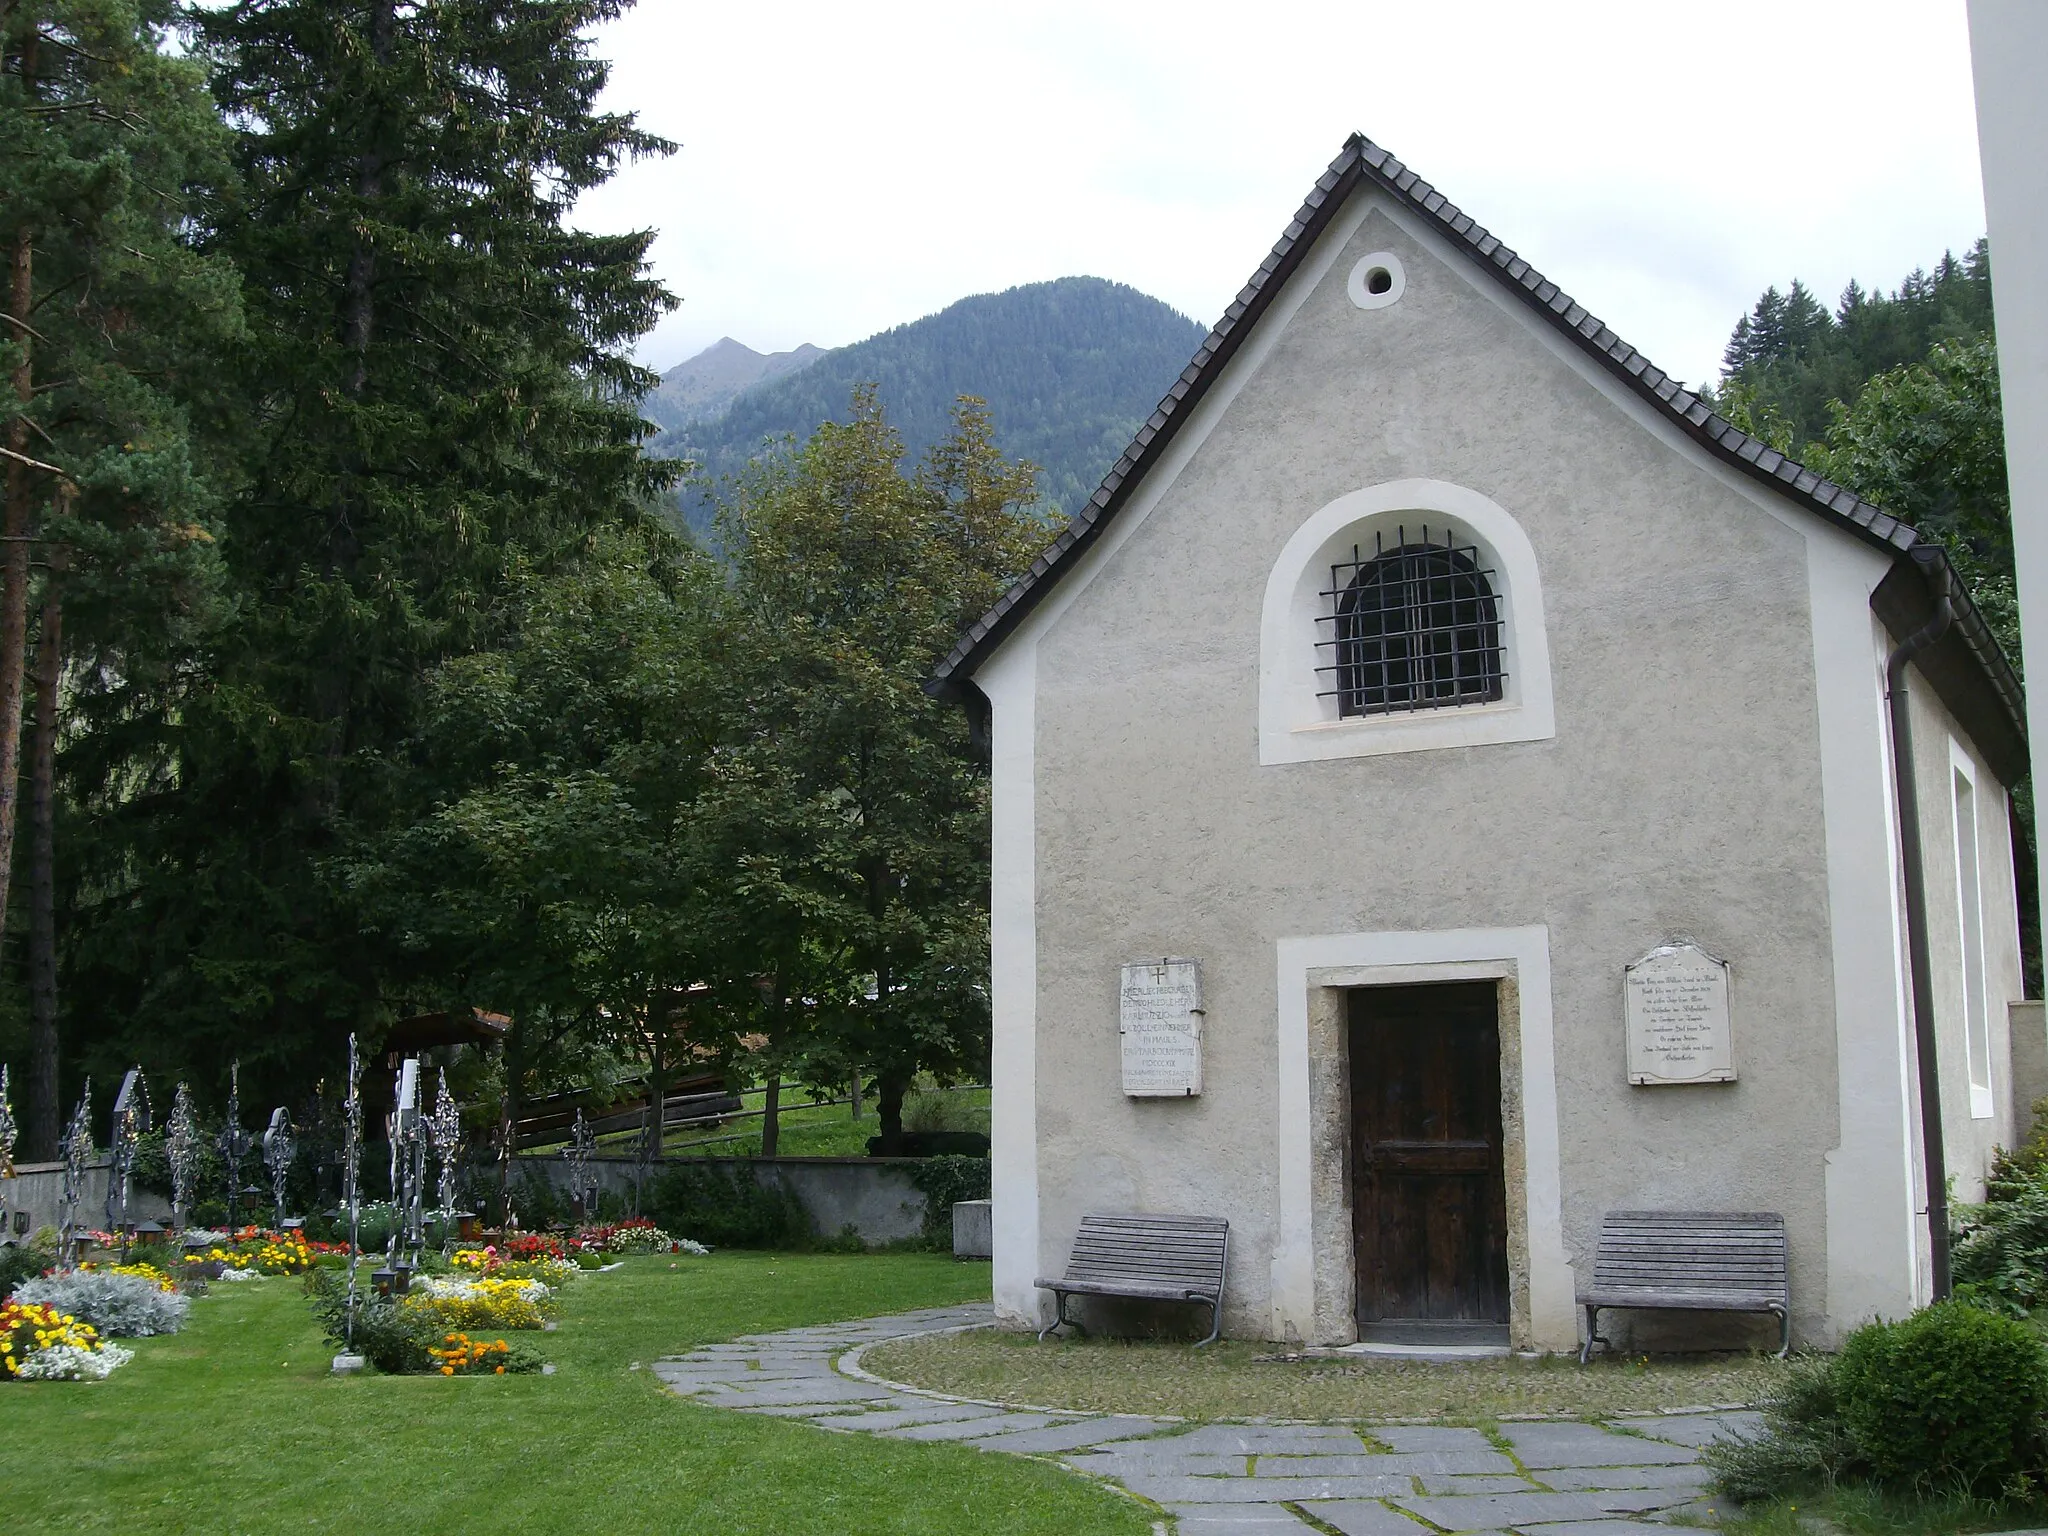 Photo showing: Italy, South Tyrol, Mauls, Pfarrkirche Hl. Oswald König. The first church in Mauls was built in 1329. The present church is dedicated to Saint Oswald and is distinguished by an imposing stone bell-tower with a roof spire. The interior frescos are painted by different artists of the eighteenth and nineteenth centuries. Here is the churchyard chapel.